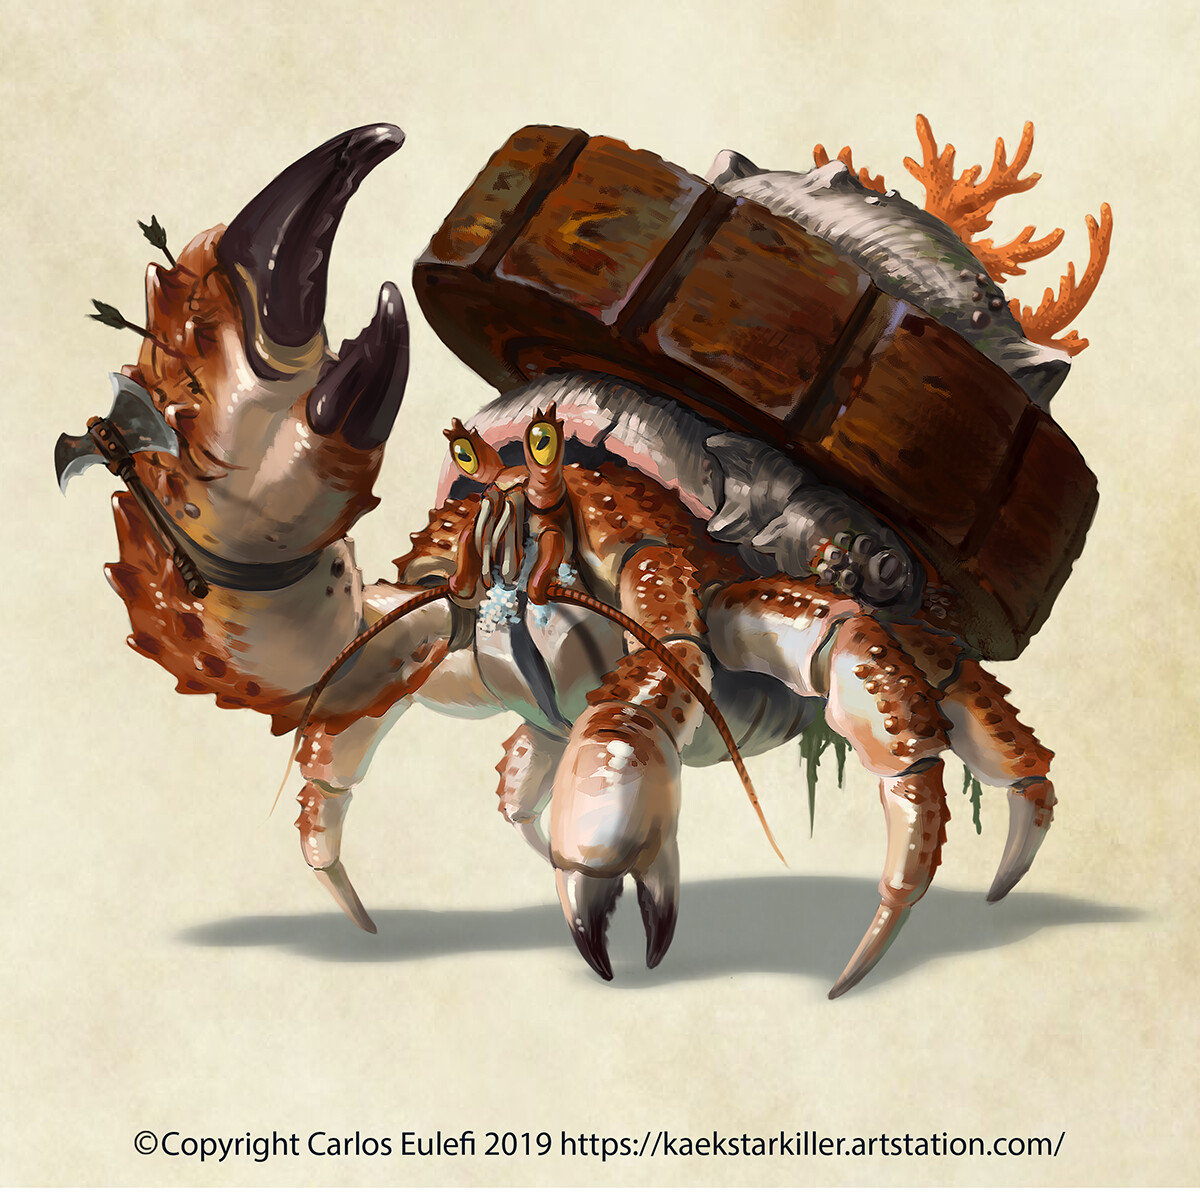 D&amp;D creature comission!
The almighty Giant Wheel-Crab!